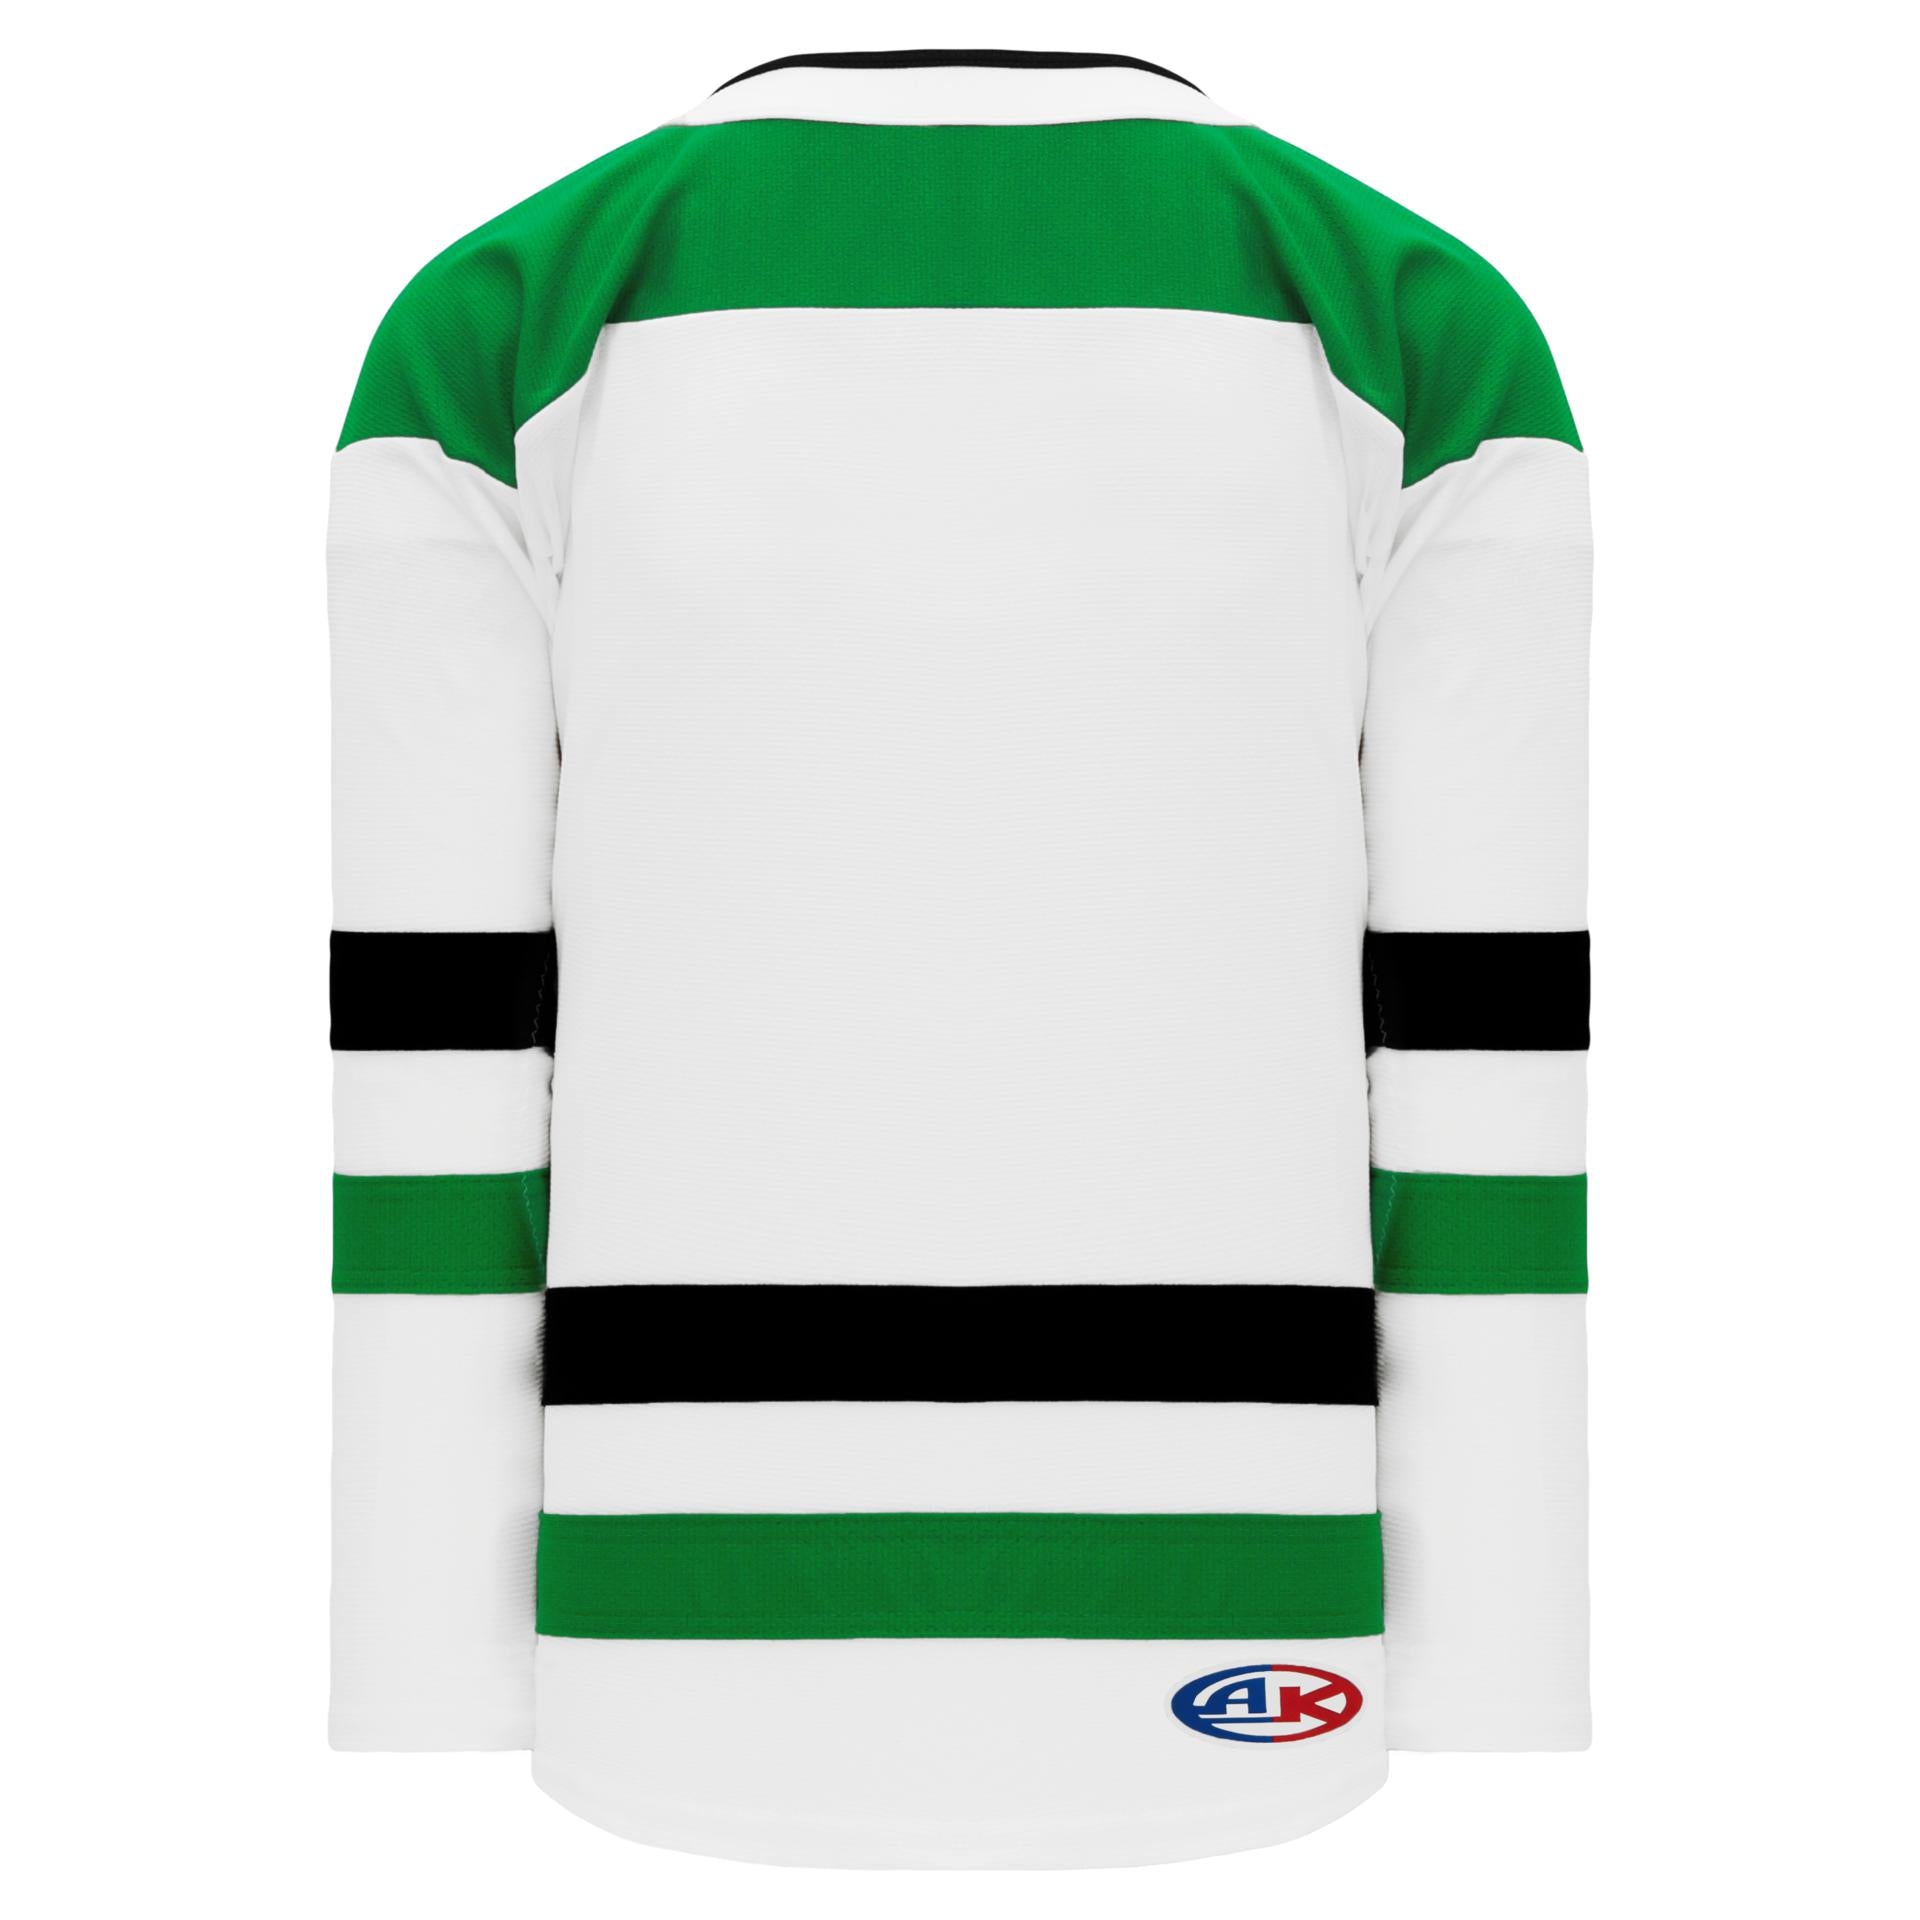 A previously unseen Dallas Stars concept jersey for an unused